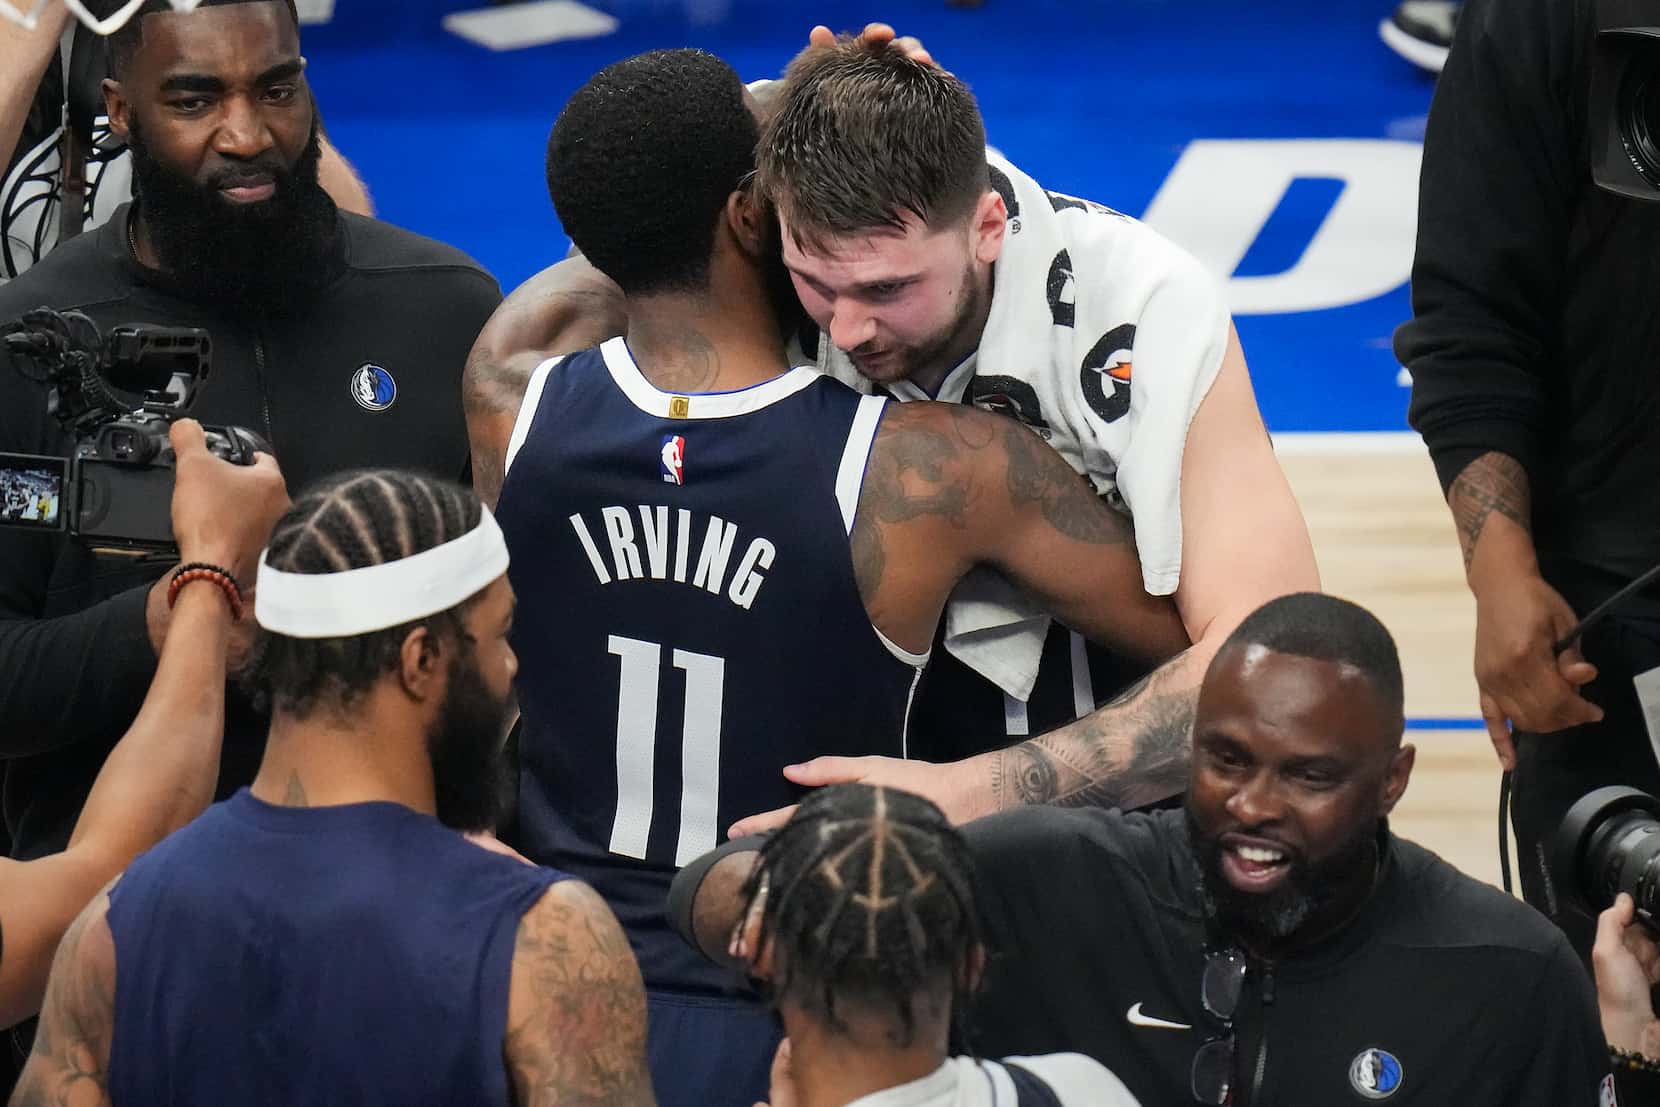 Mavs' Kyrie Irving, Luka Doncic excel in Game 1 role reversal to fluster hesitant Wolves